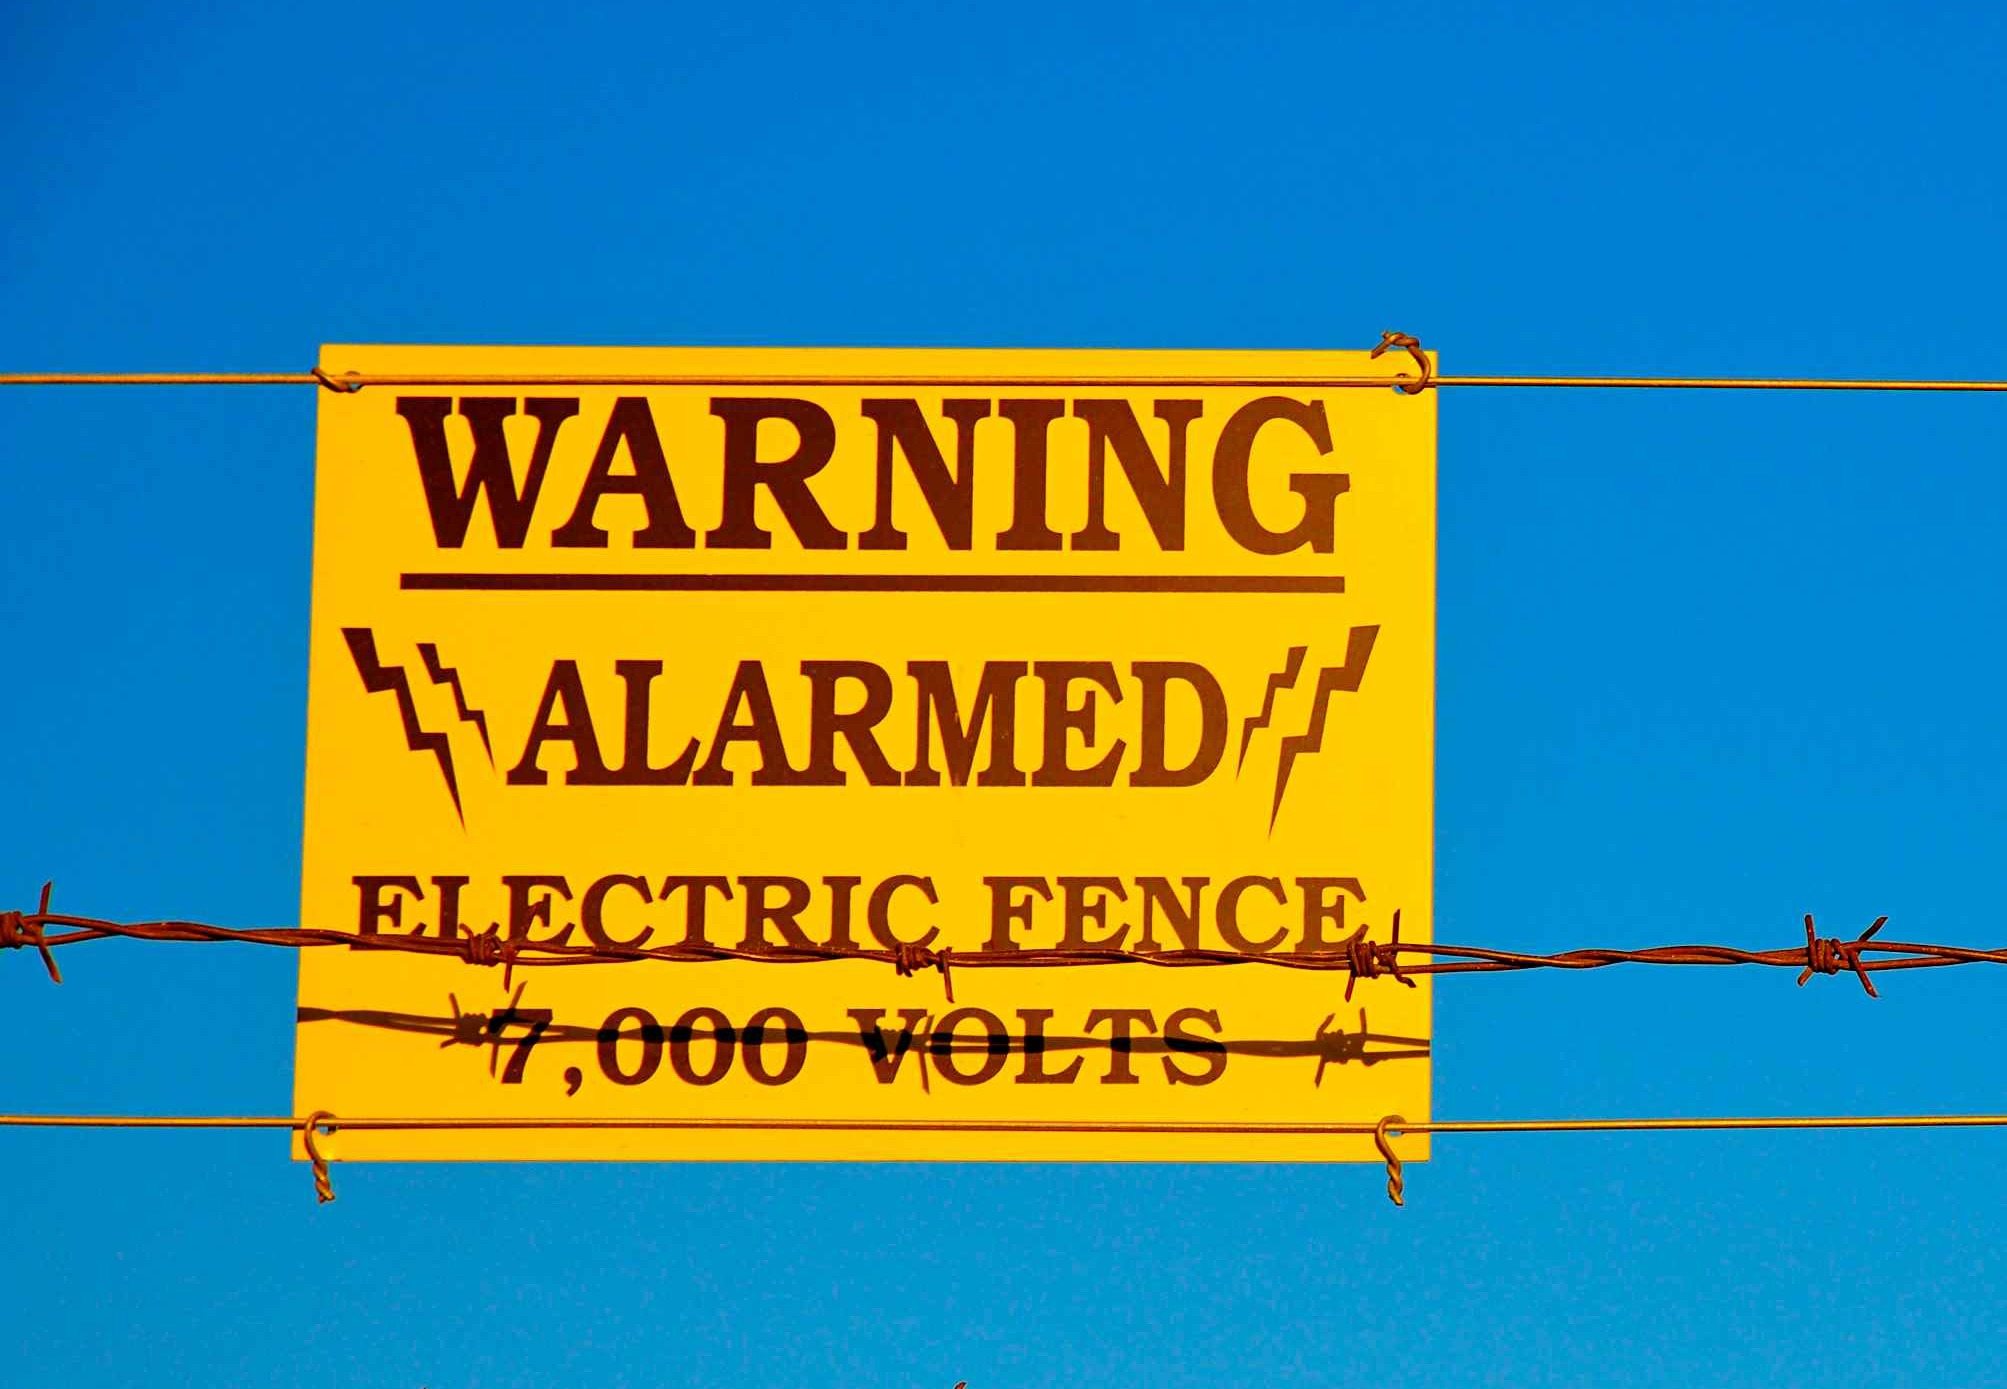 Are Electric Fences Legal in Residential Areas?